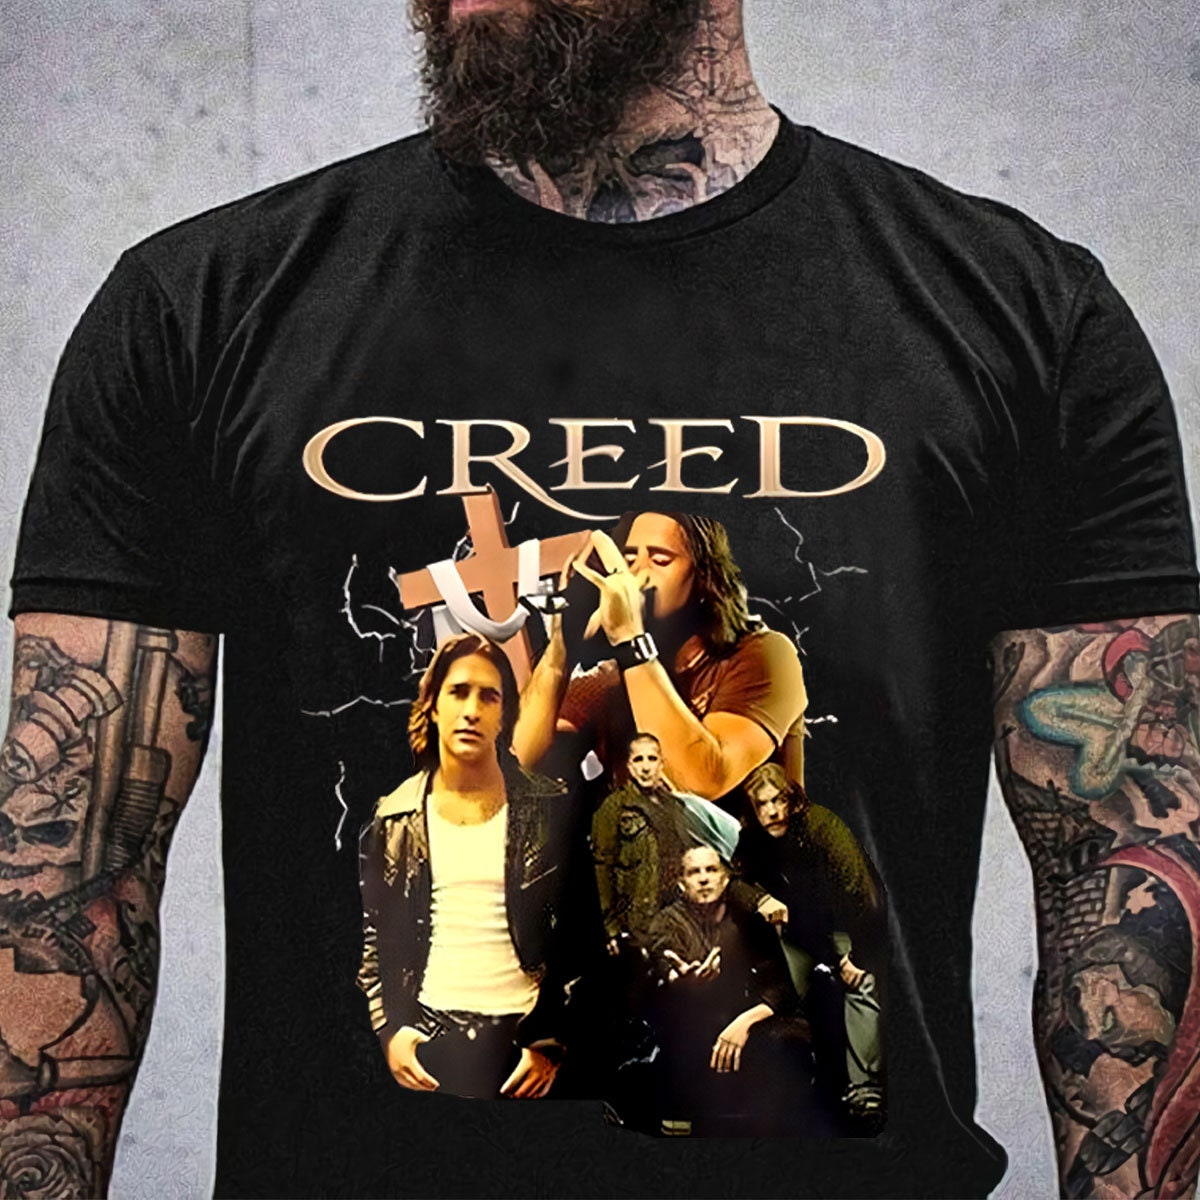 Creed Human Clay Tour 3/4 Sleeve T-shirt-grey and Black-vintage - Etsy